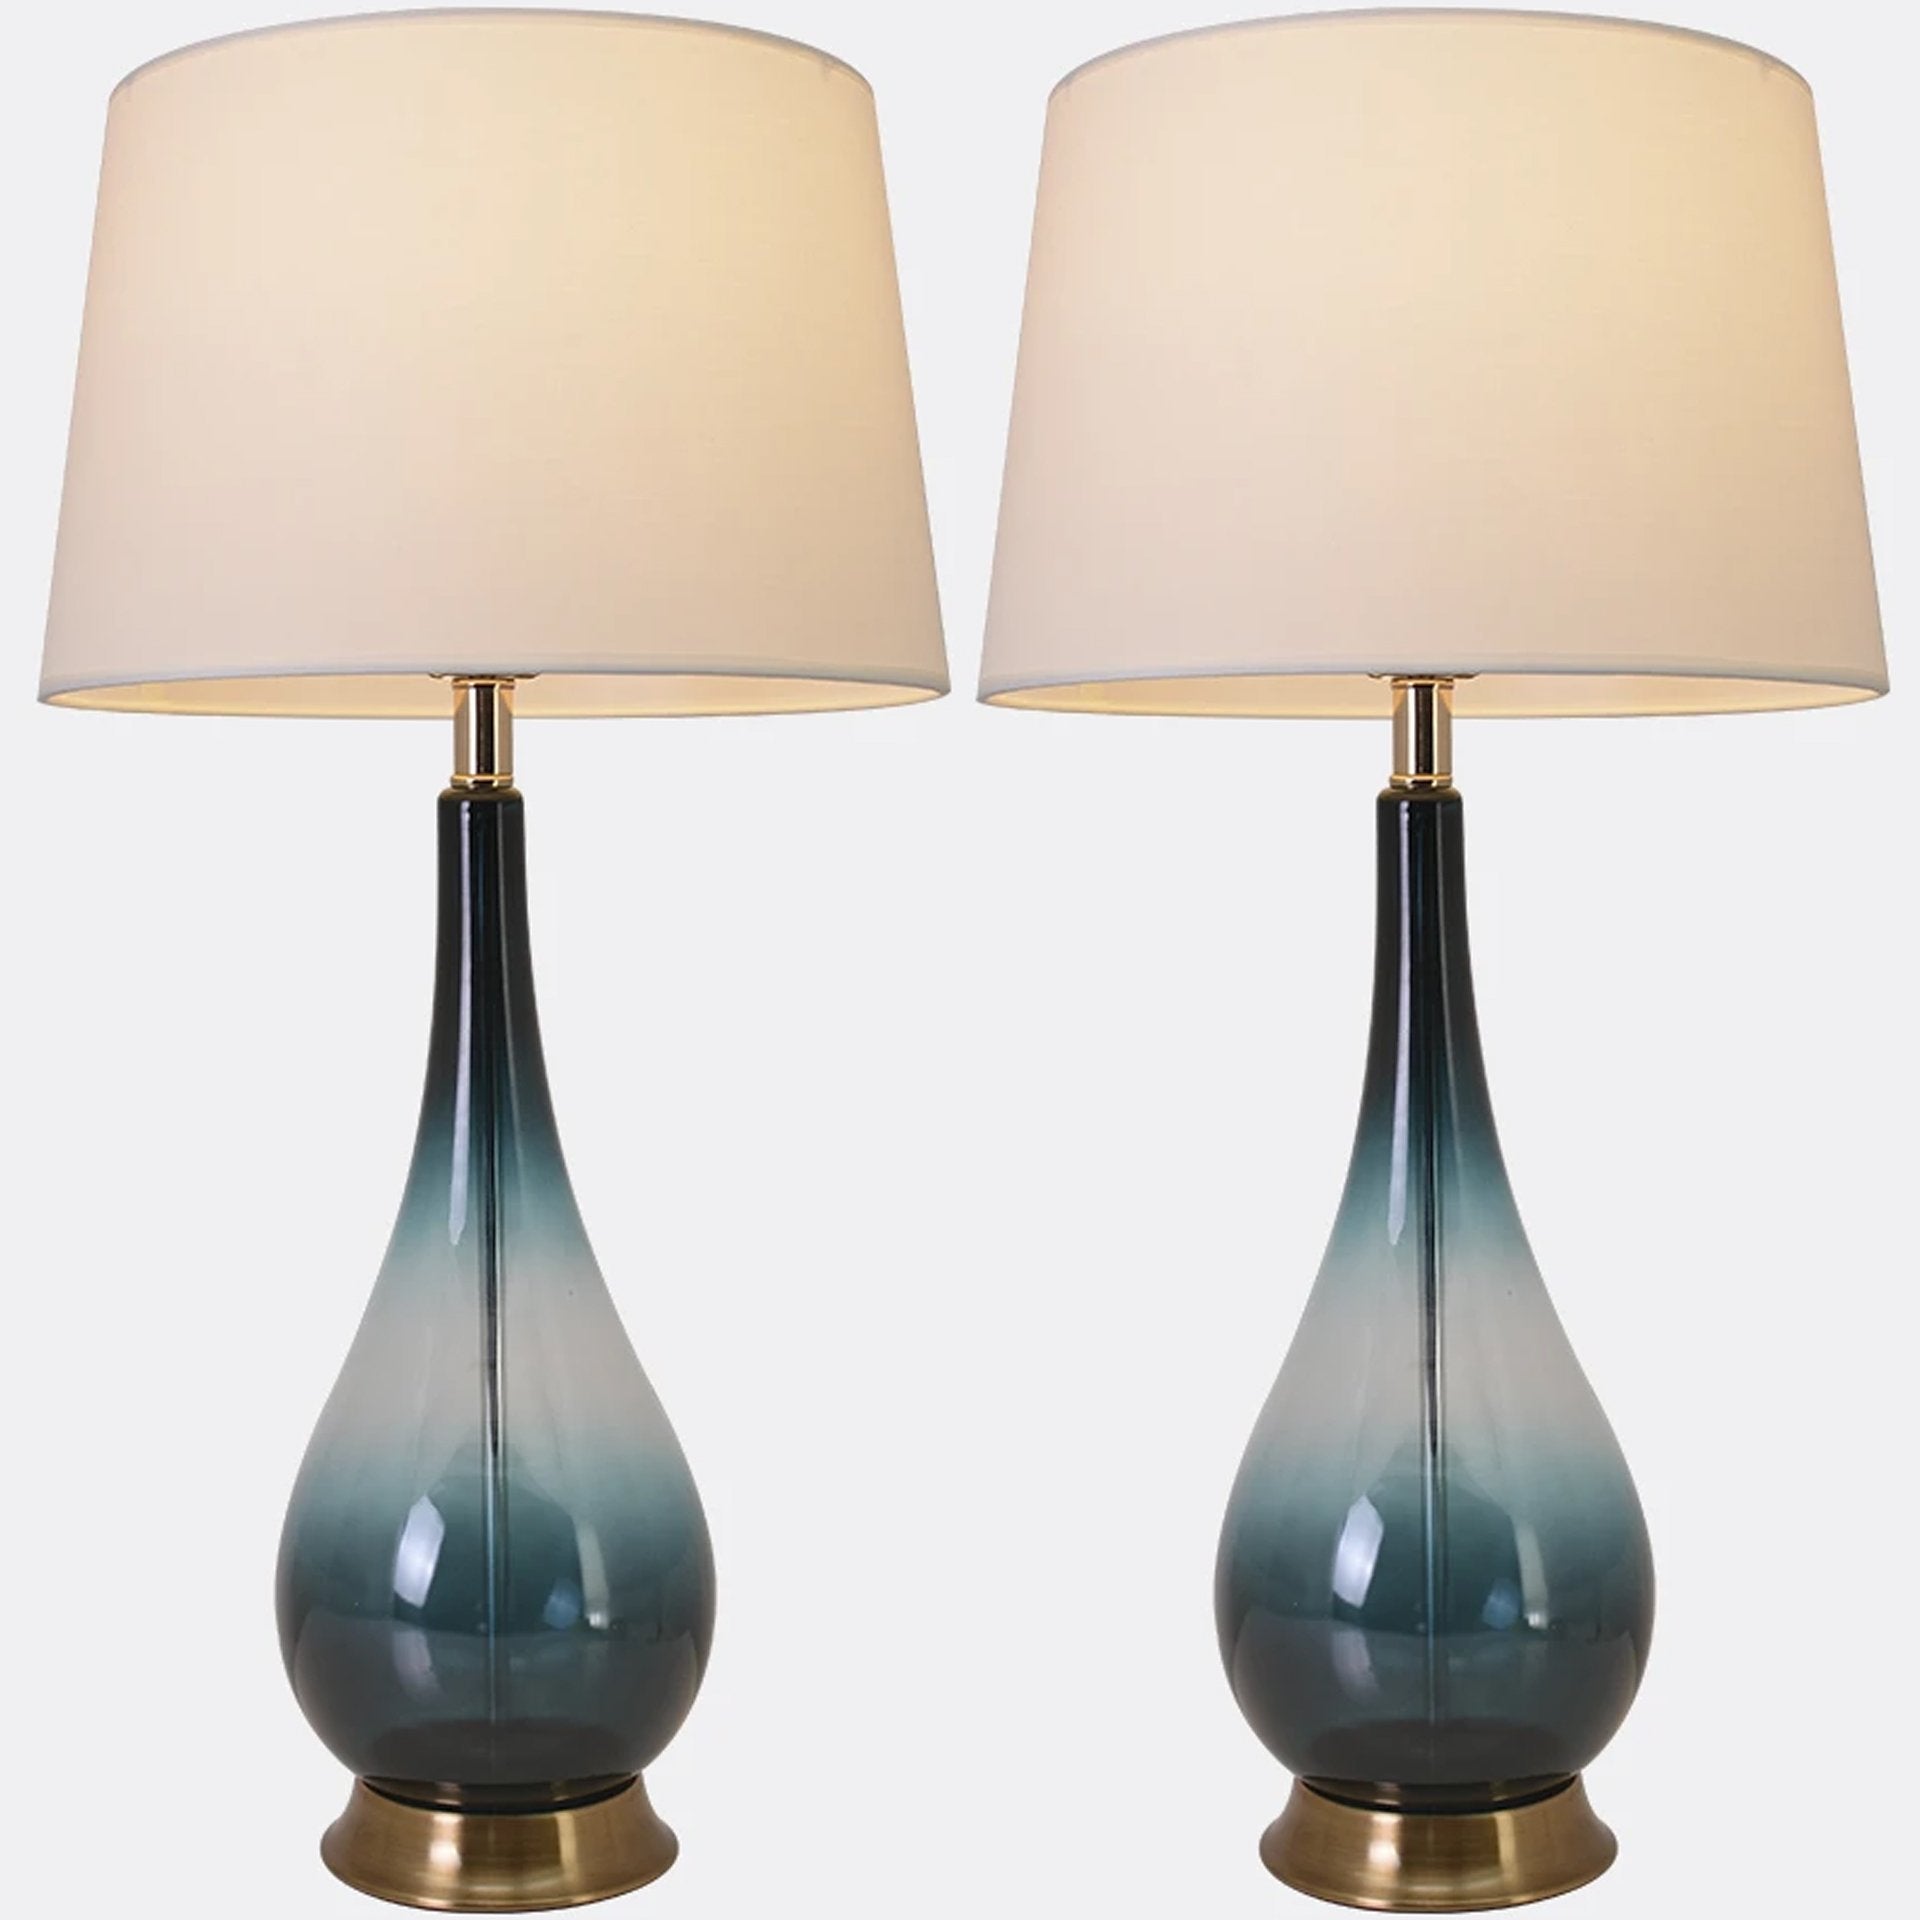 Tulip Big Translucent Ombre Glass Table Lamp 30" - Forest Green Ombre/White (Set of 2)